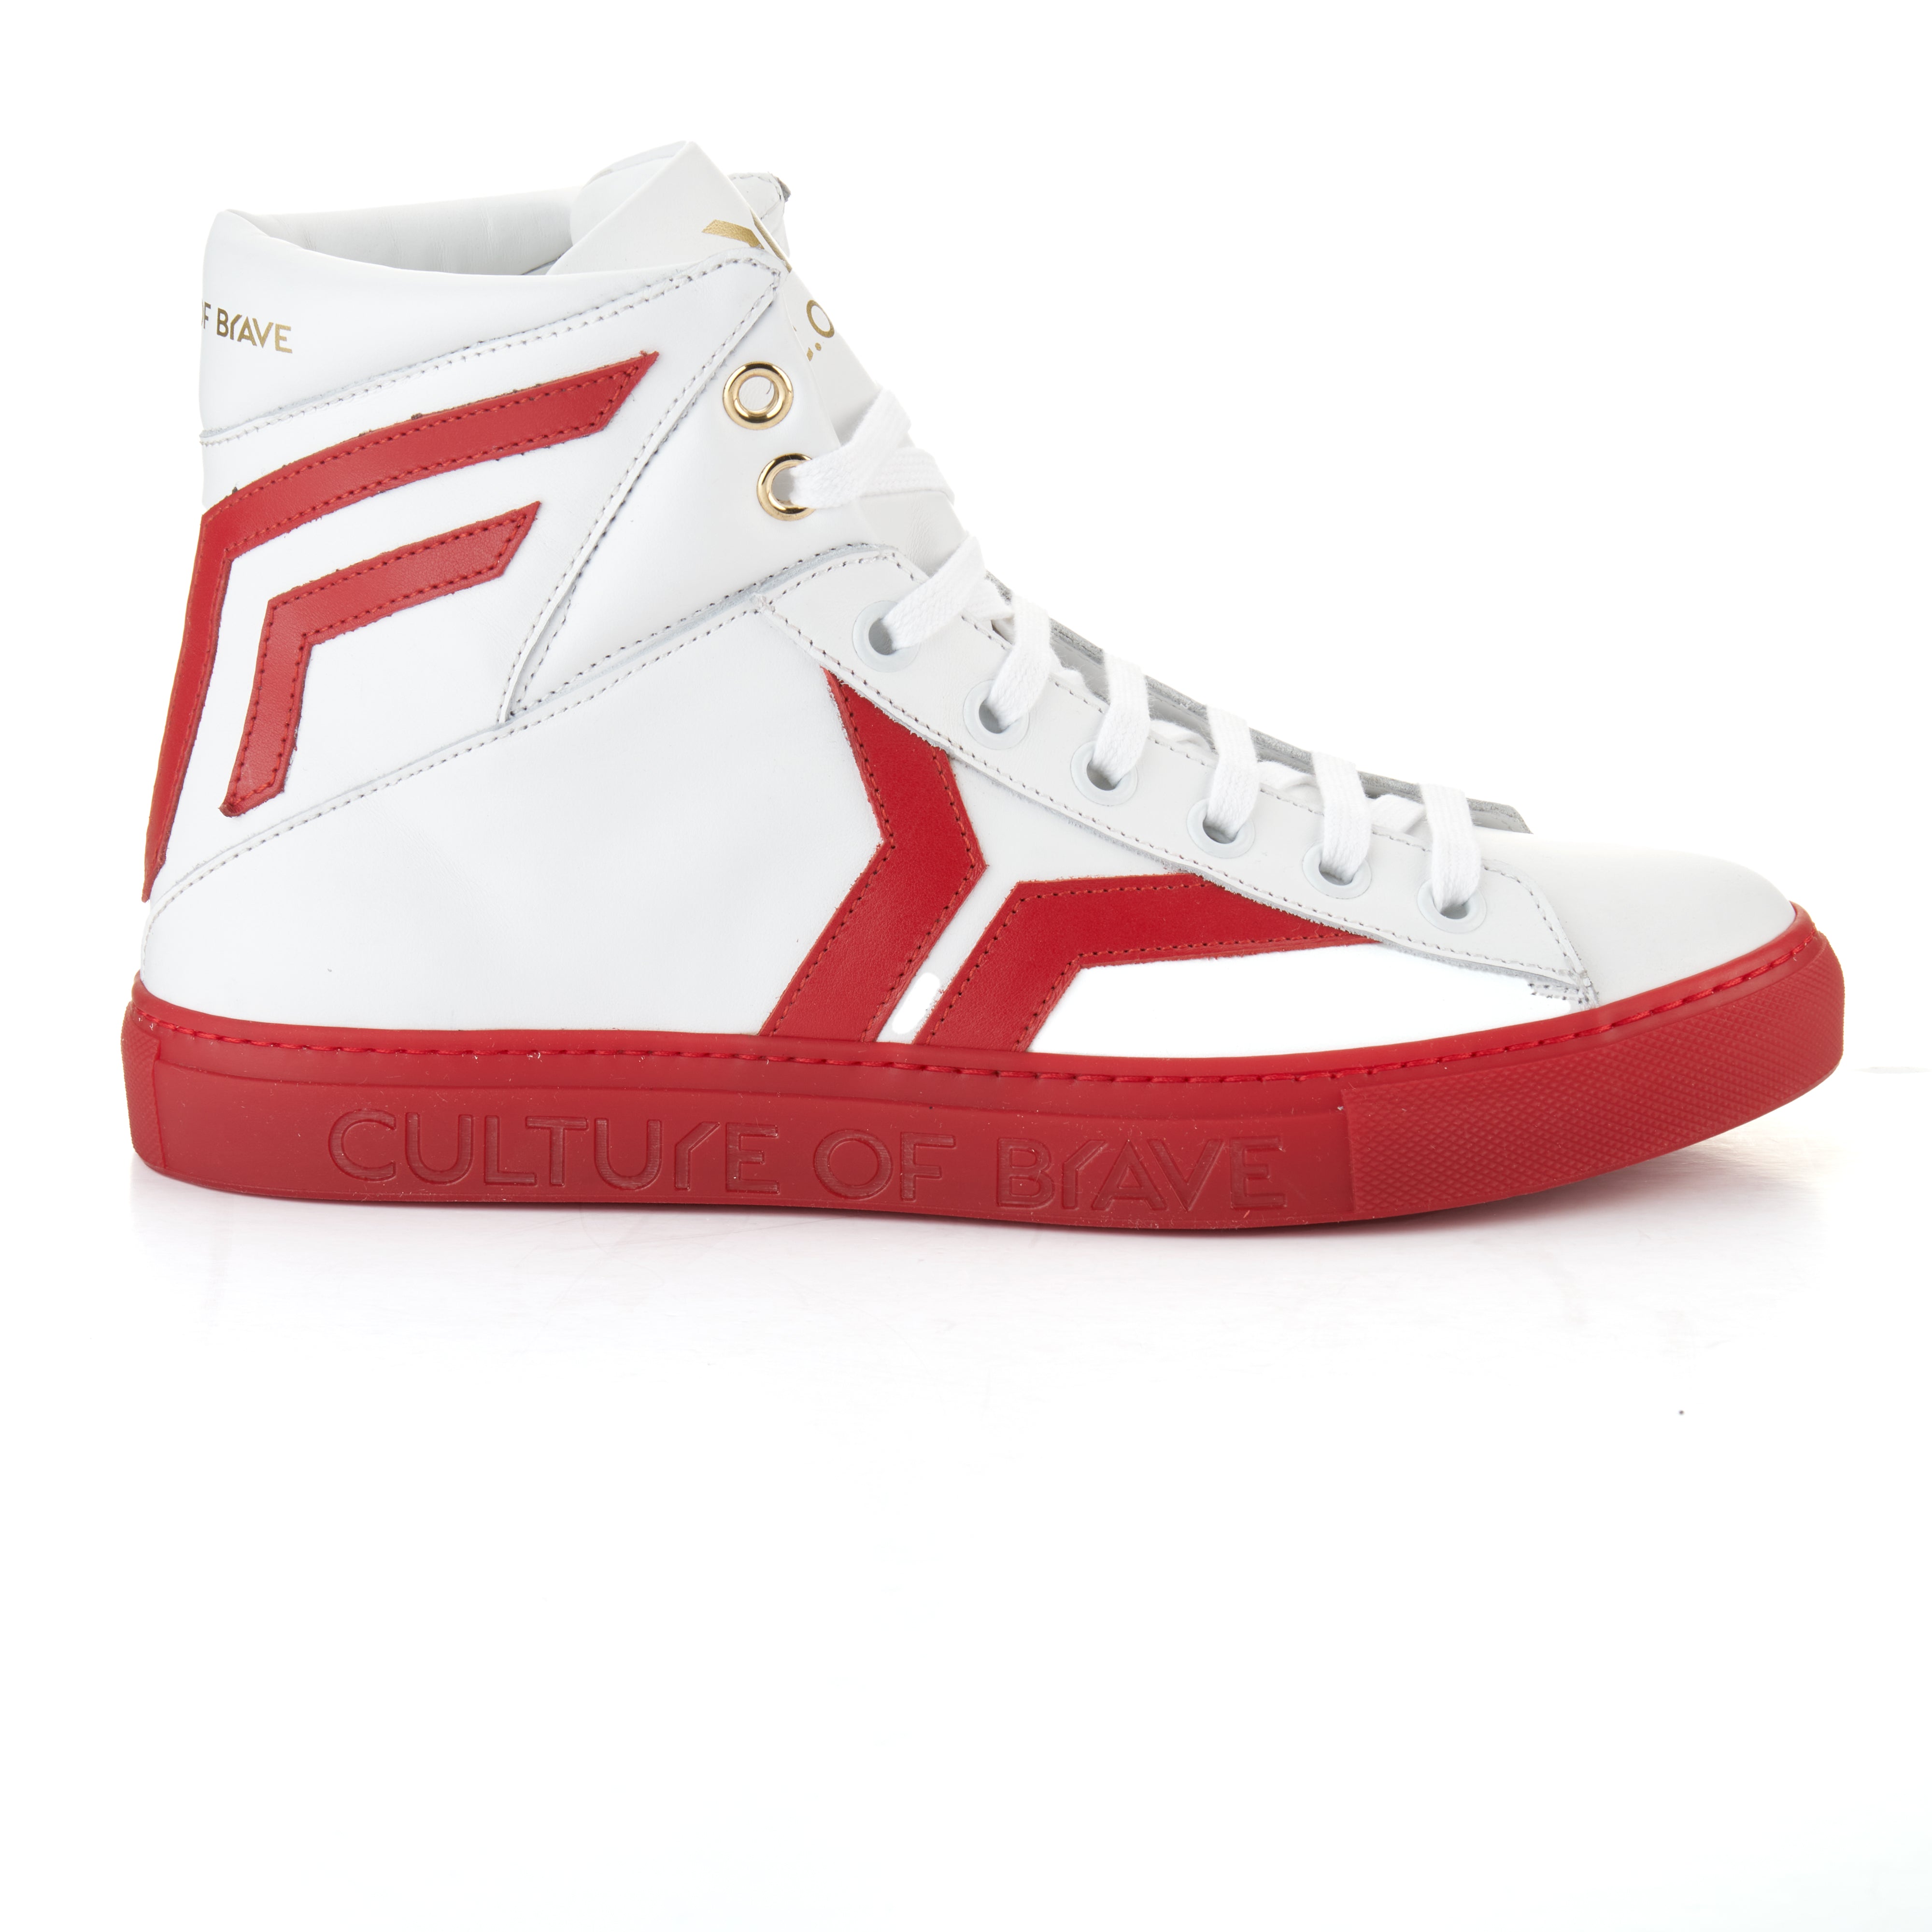 Prepared To Risk Mens High Cut White Leather Sneaker| Culture of Brave